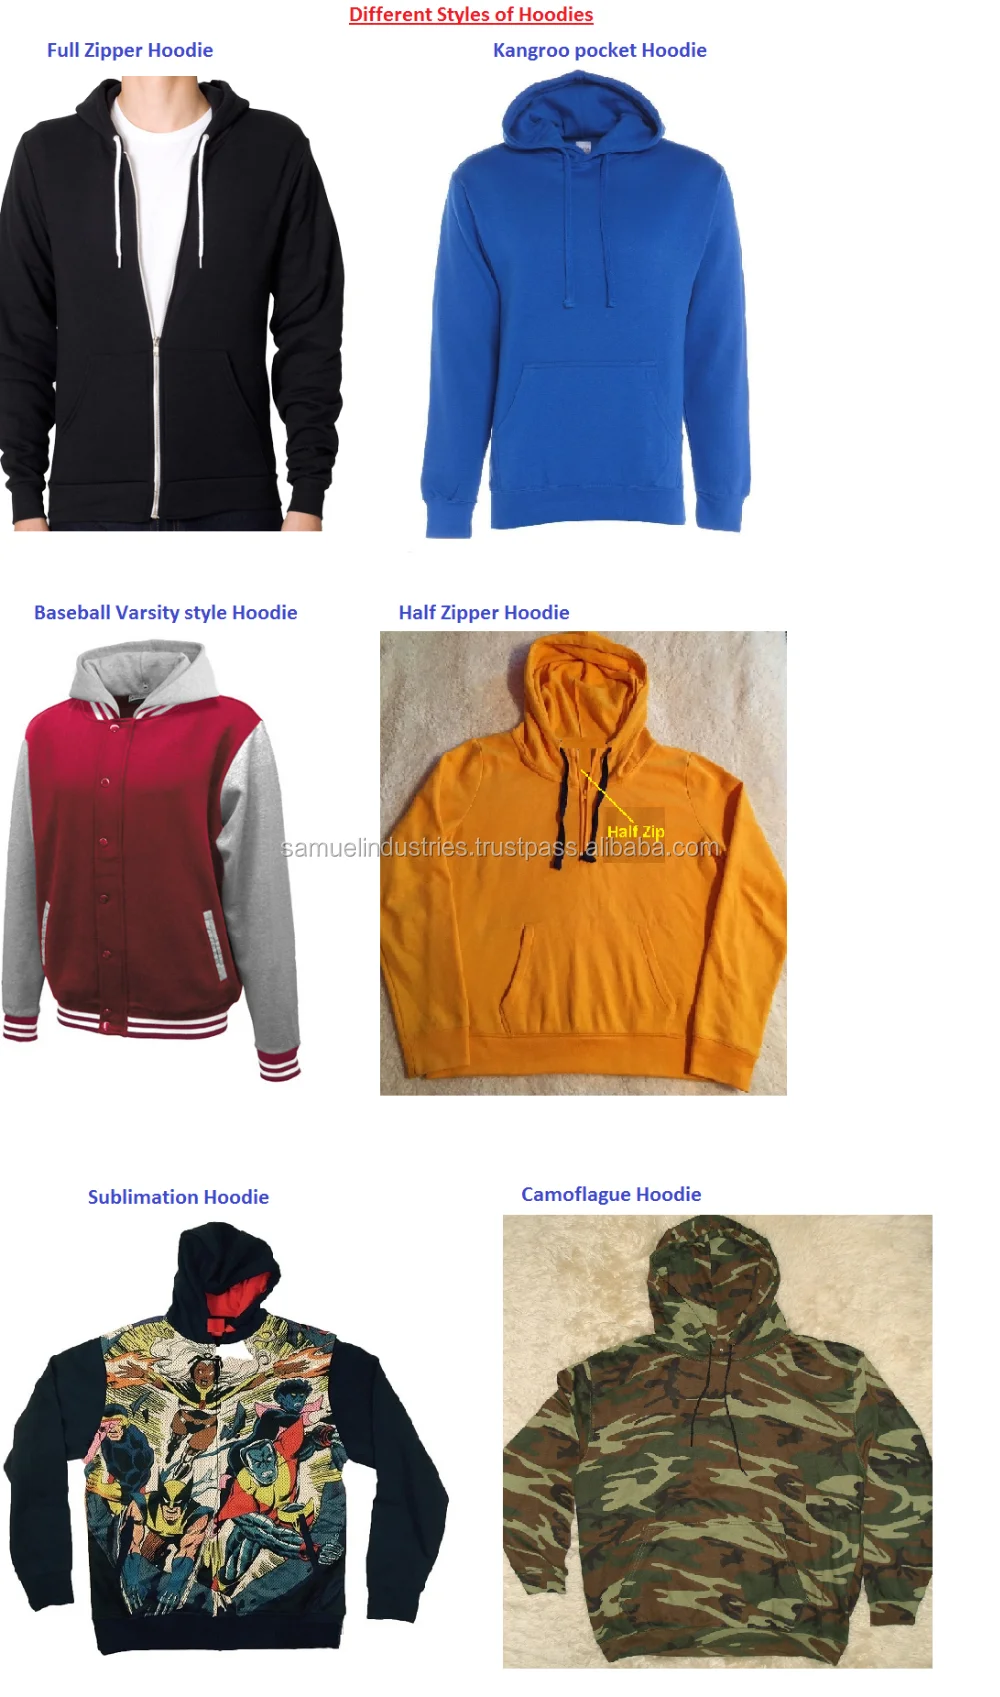 different style hoodies